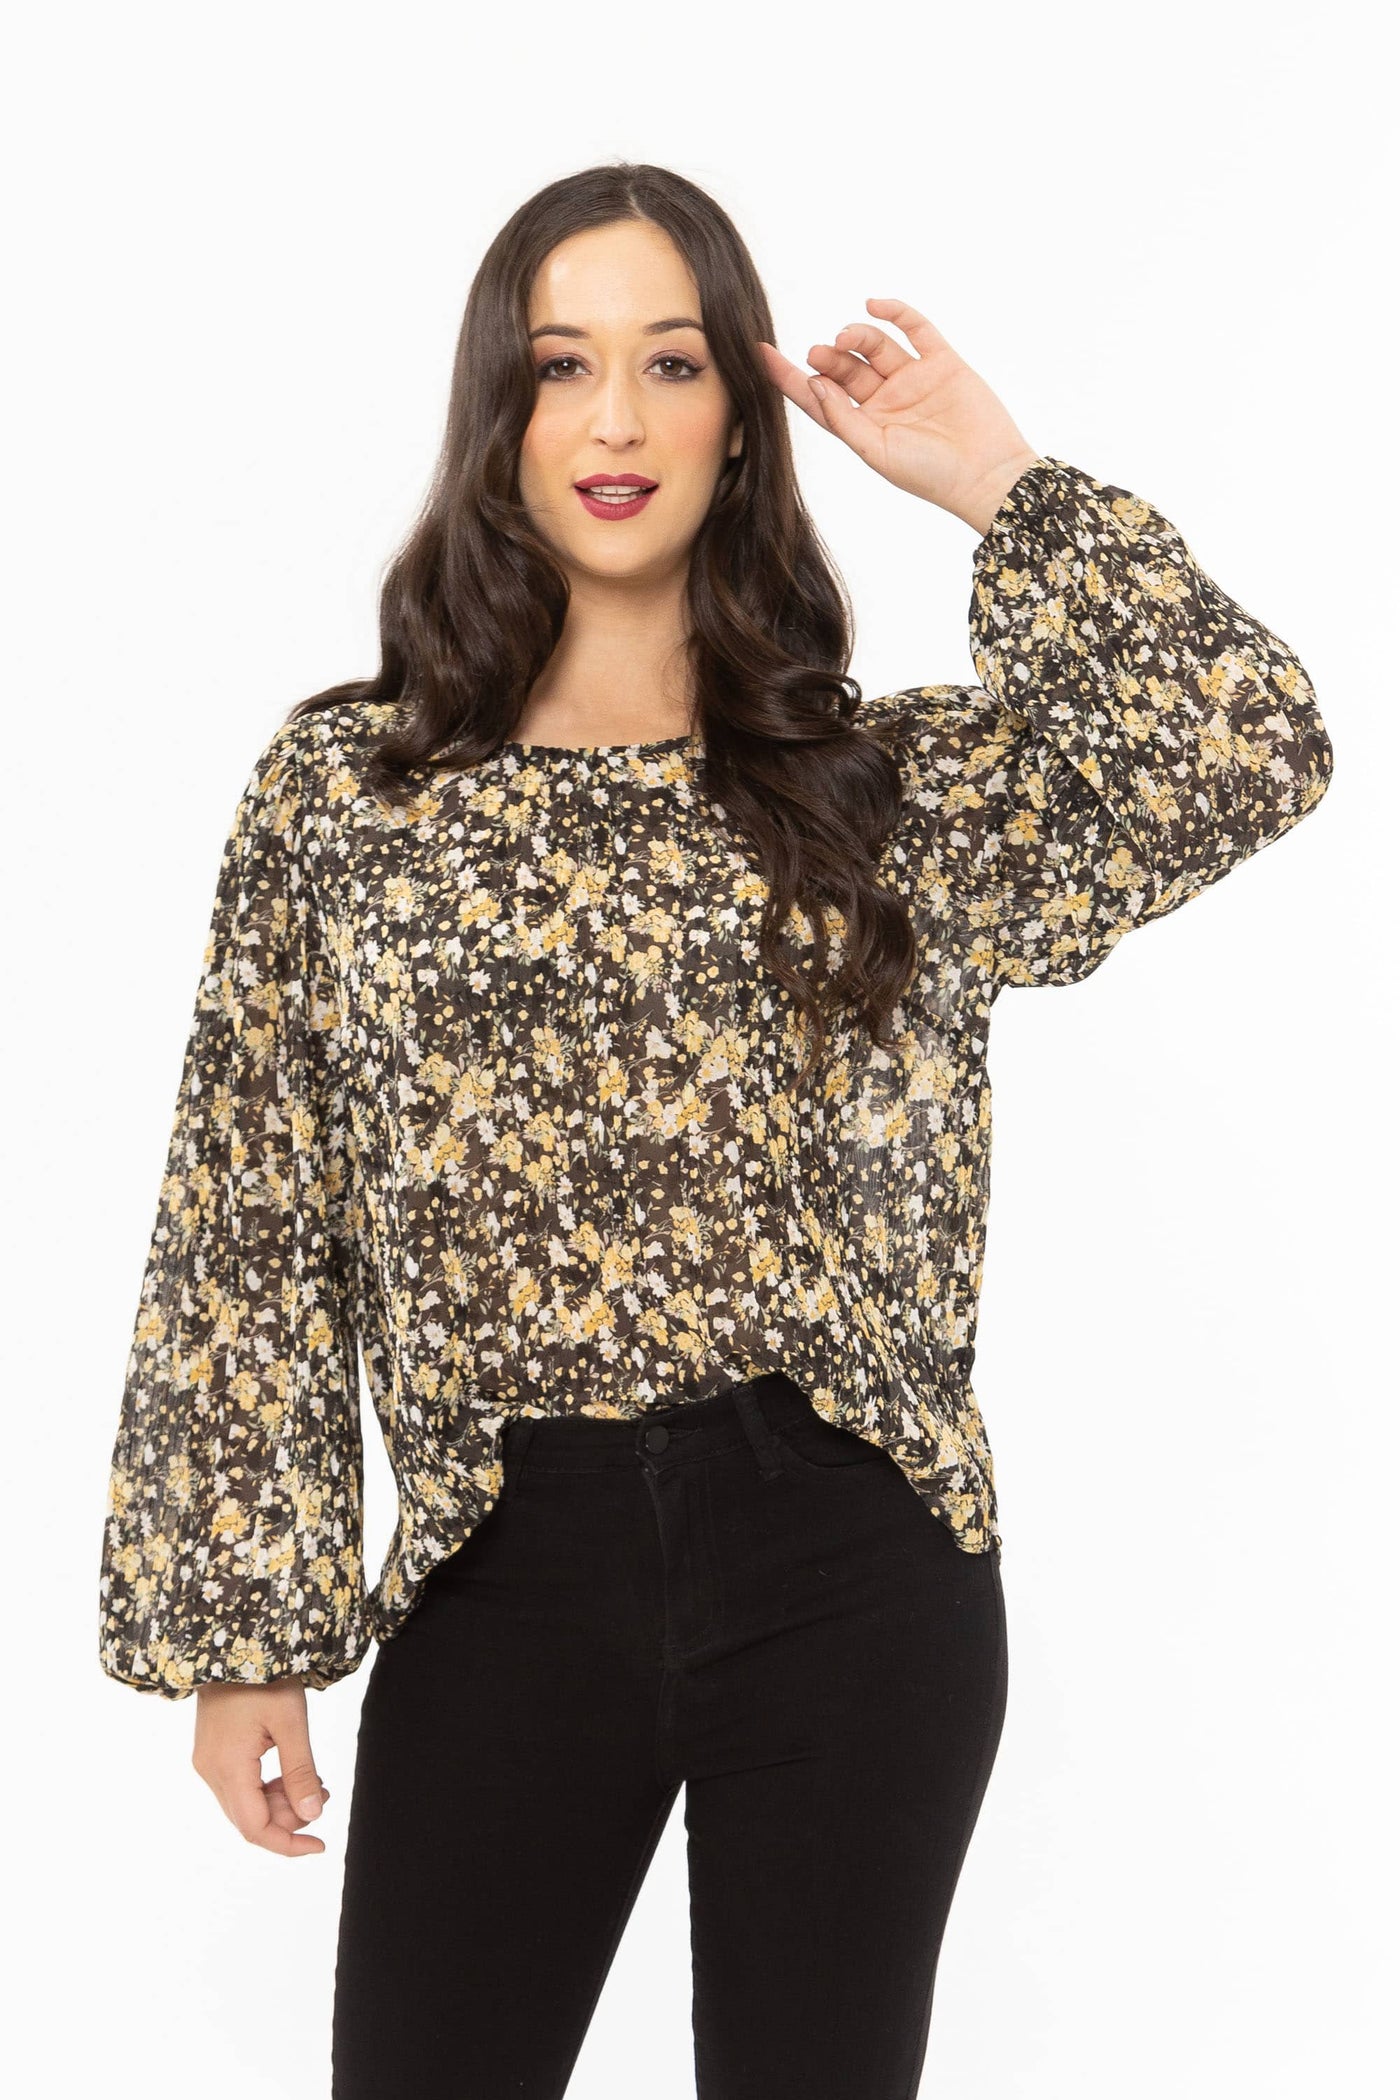 The Carefree Top is available in this lovely soft yellow and black floral print. It is a boxy style fit with bell sleeves finished with elasticated cuffs. This crinkle fabric can be worn day or night.   100% polyester crinkle fabric elasticated cuffs bell sleeves  generous fit